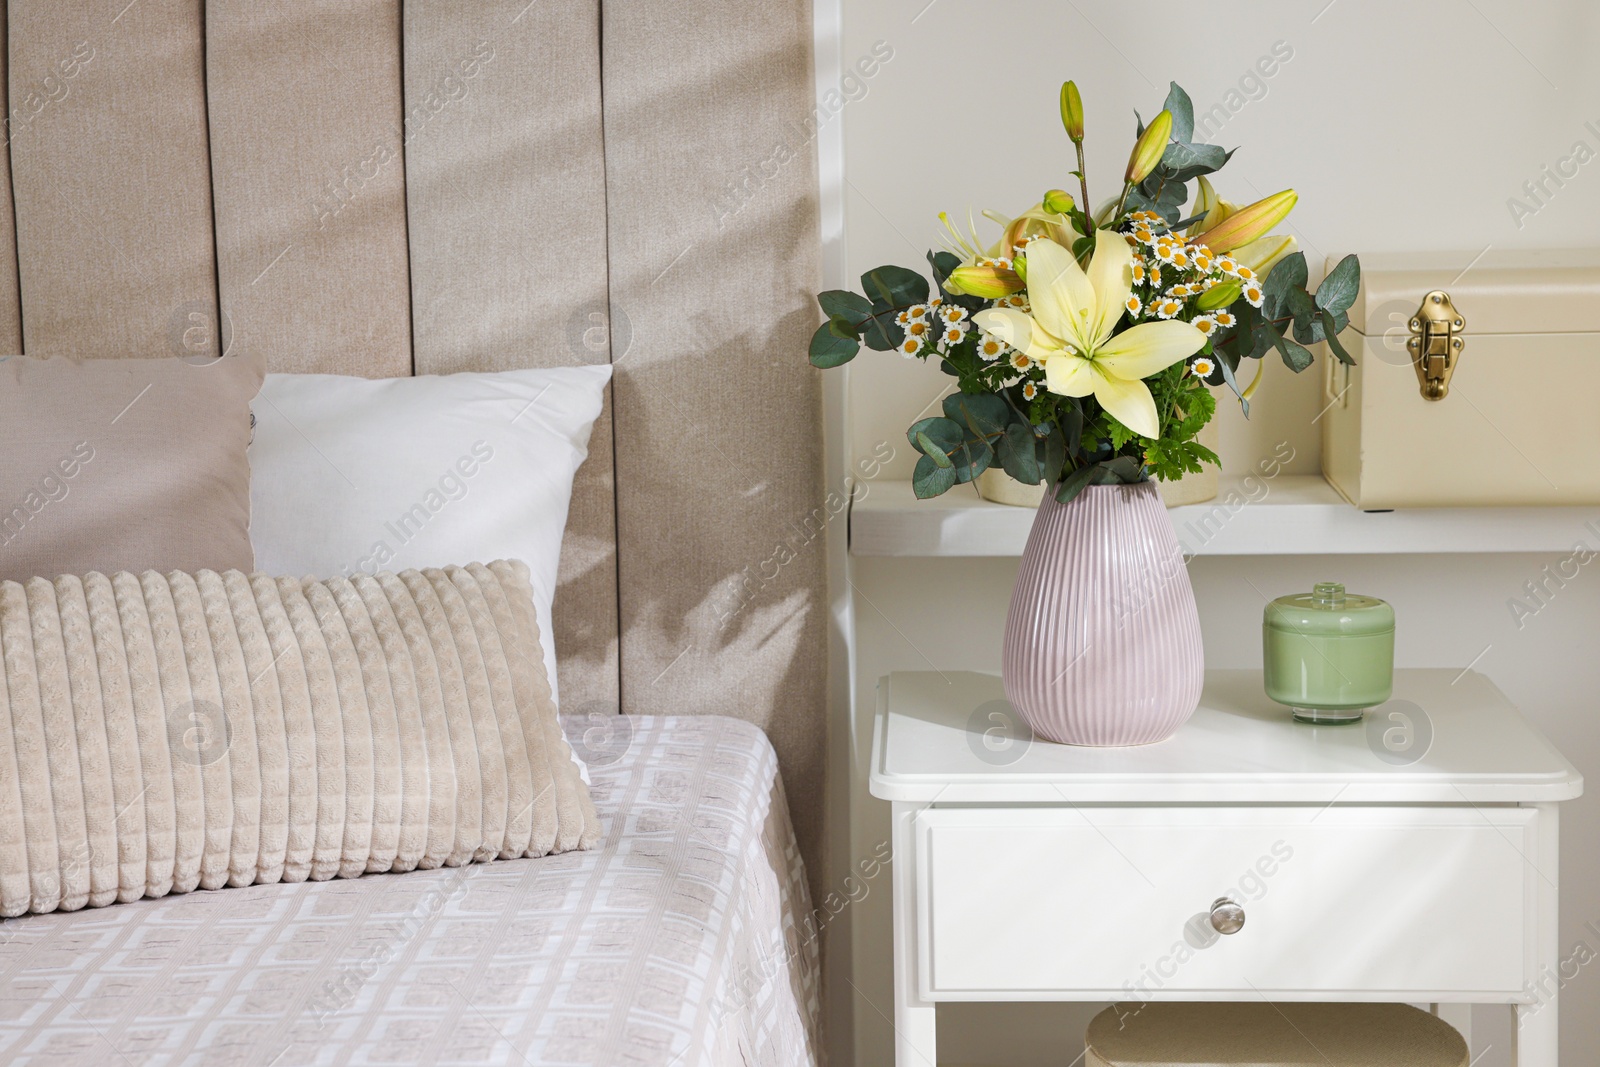 Photo of Stylish vase with flowers and decor on bedside table indoors. Bedroom interior elements